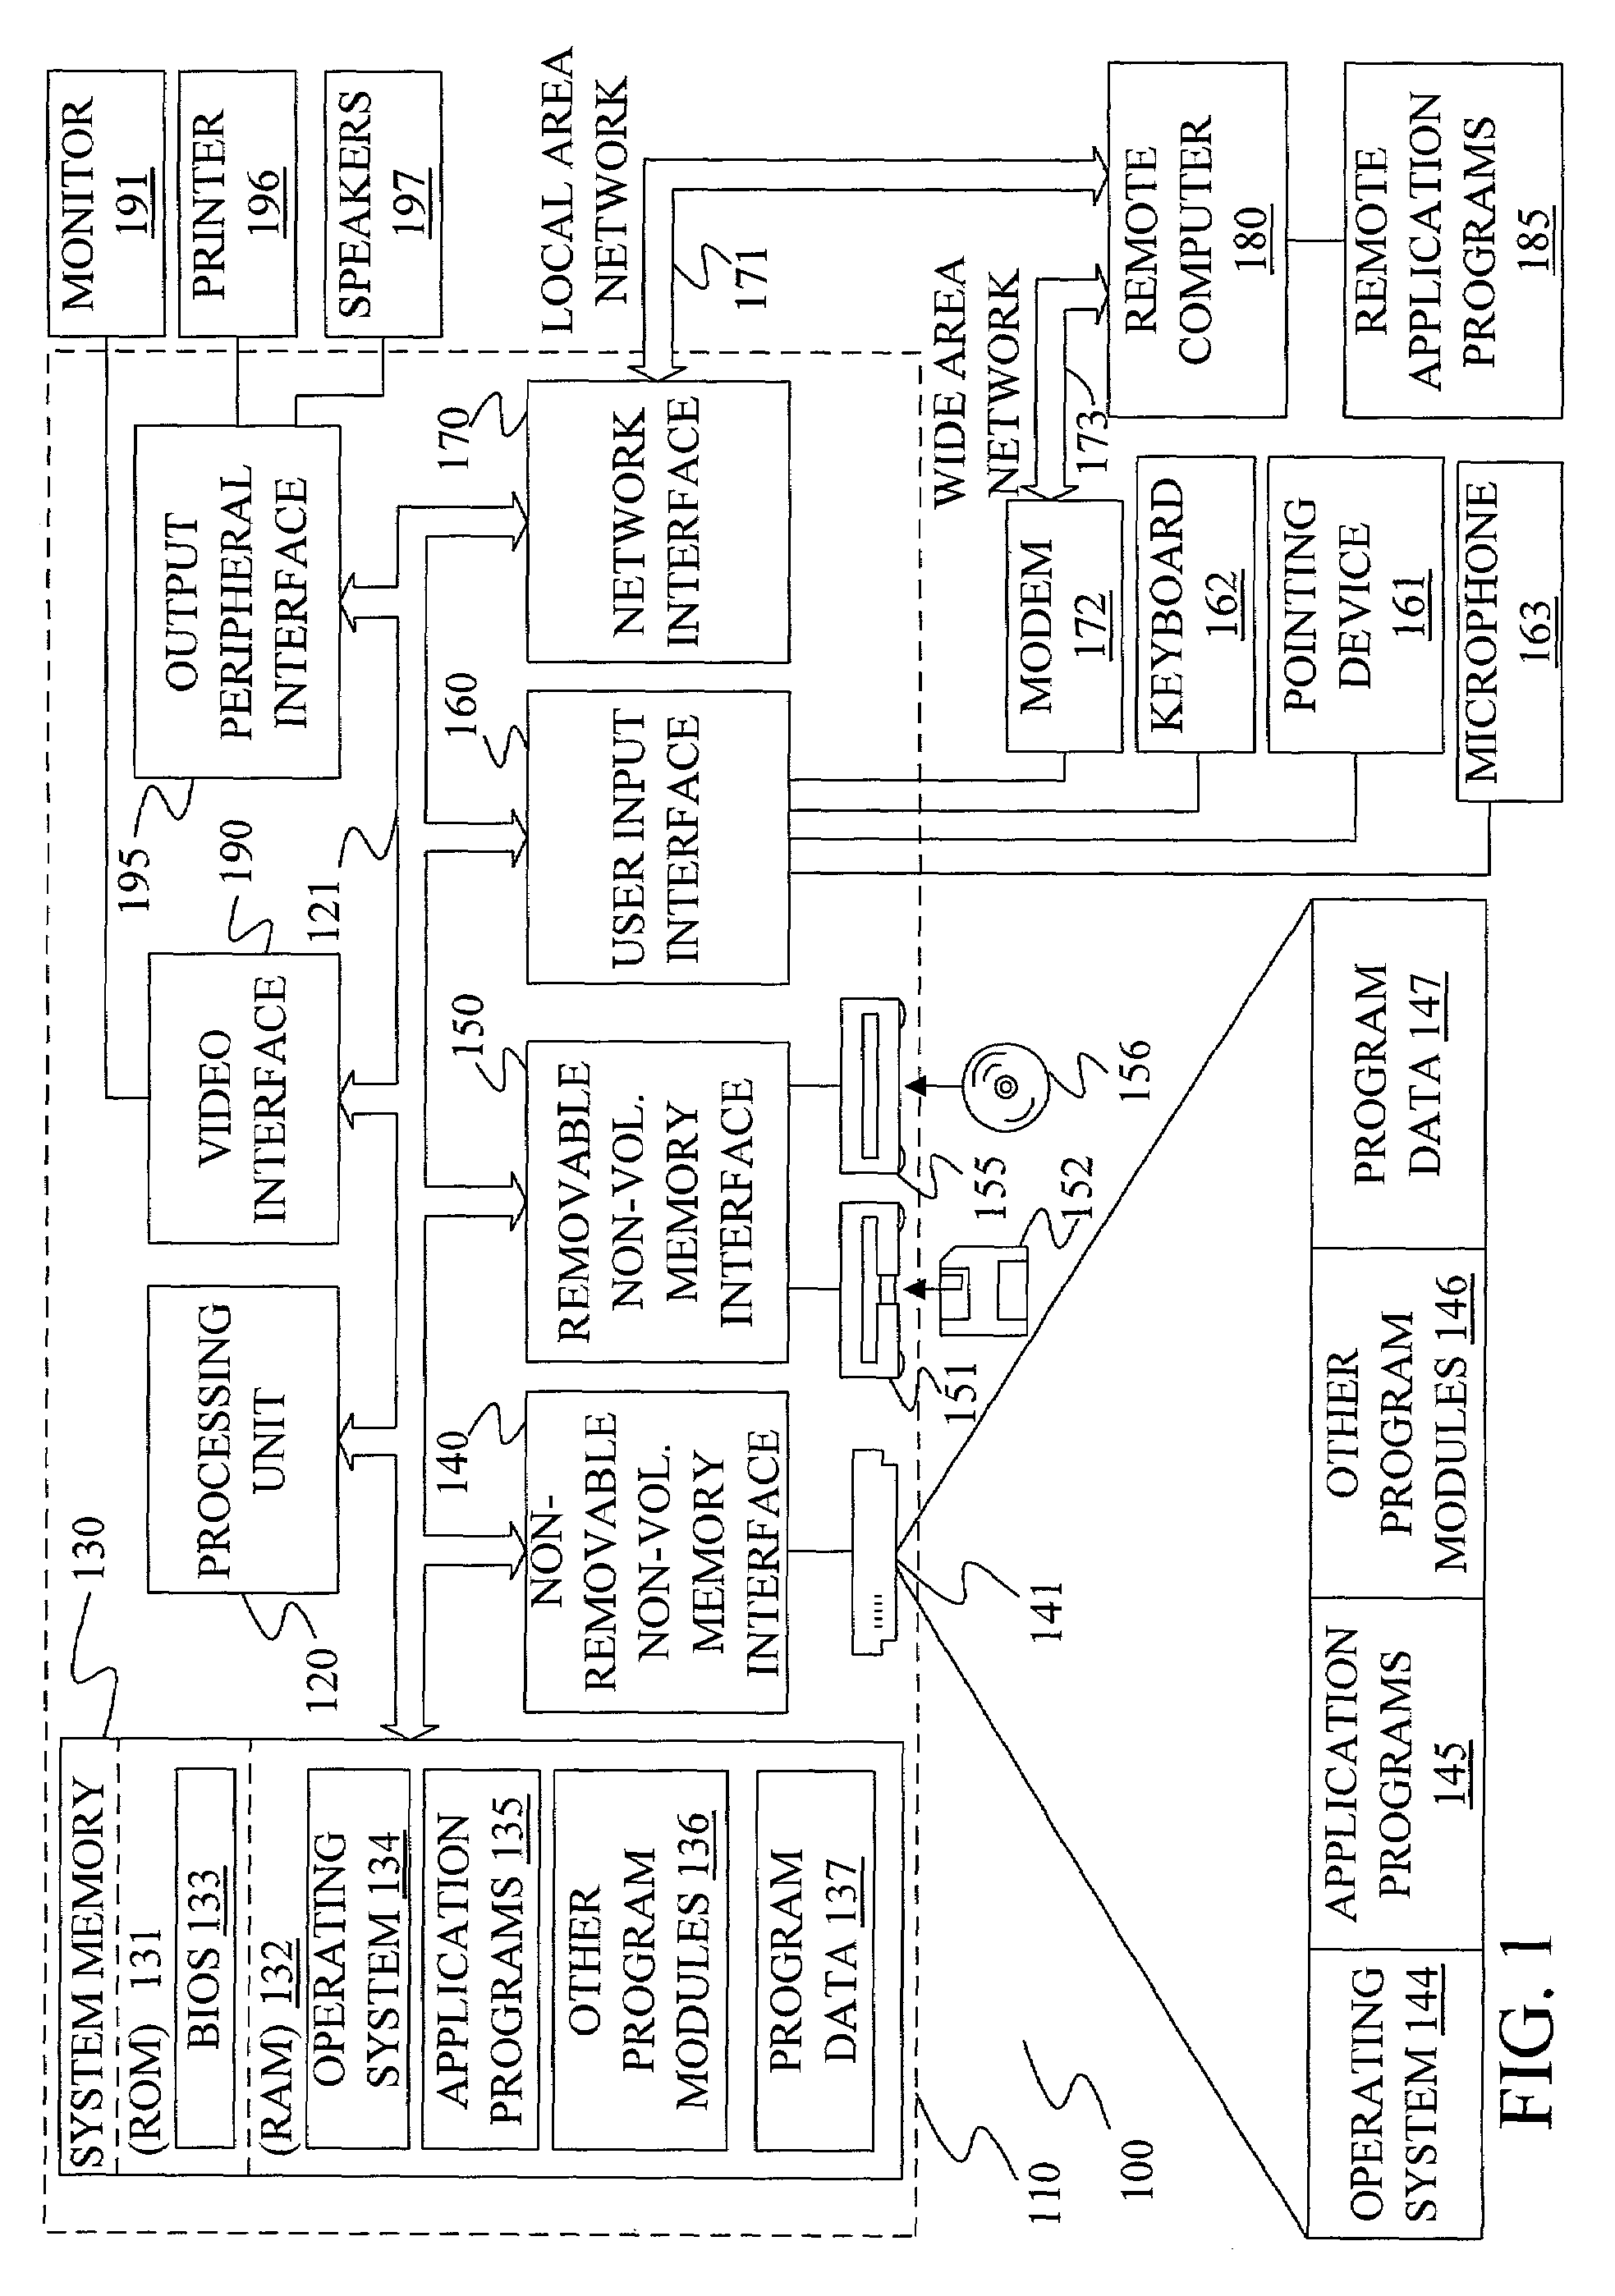 Method of pattern recognition using noise reduction uncertainty